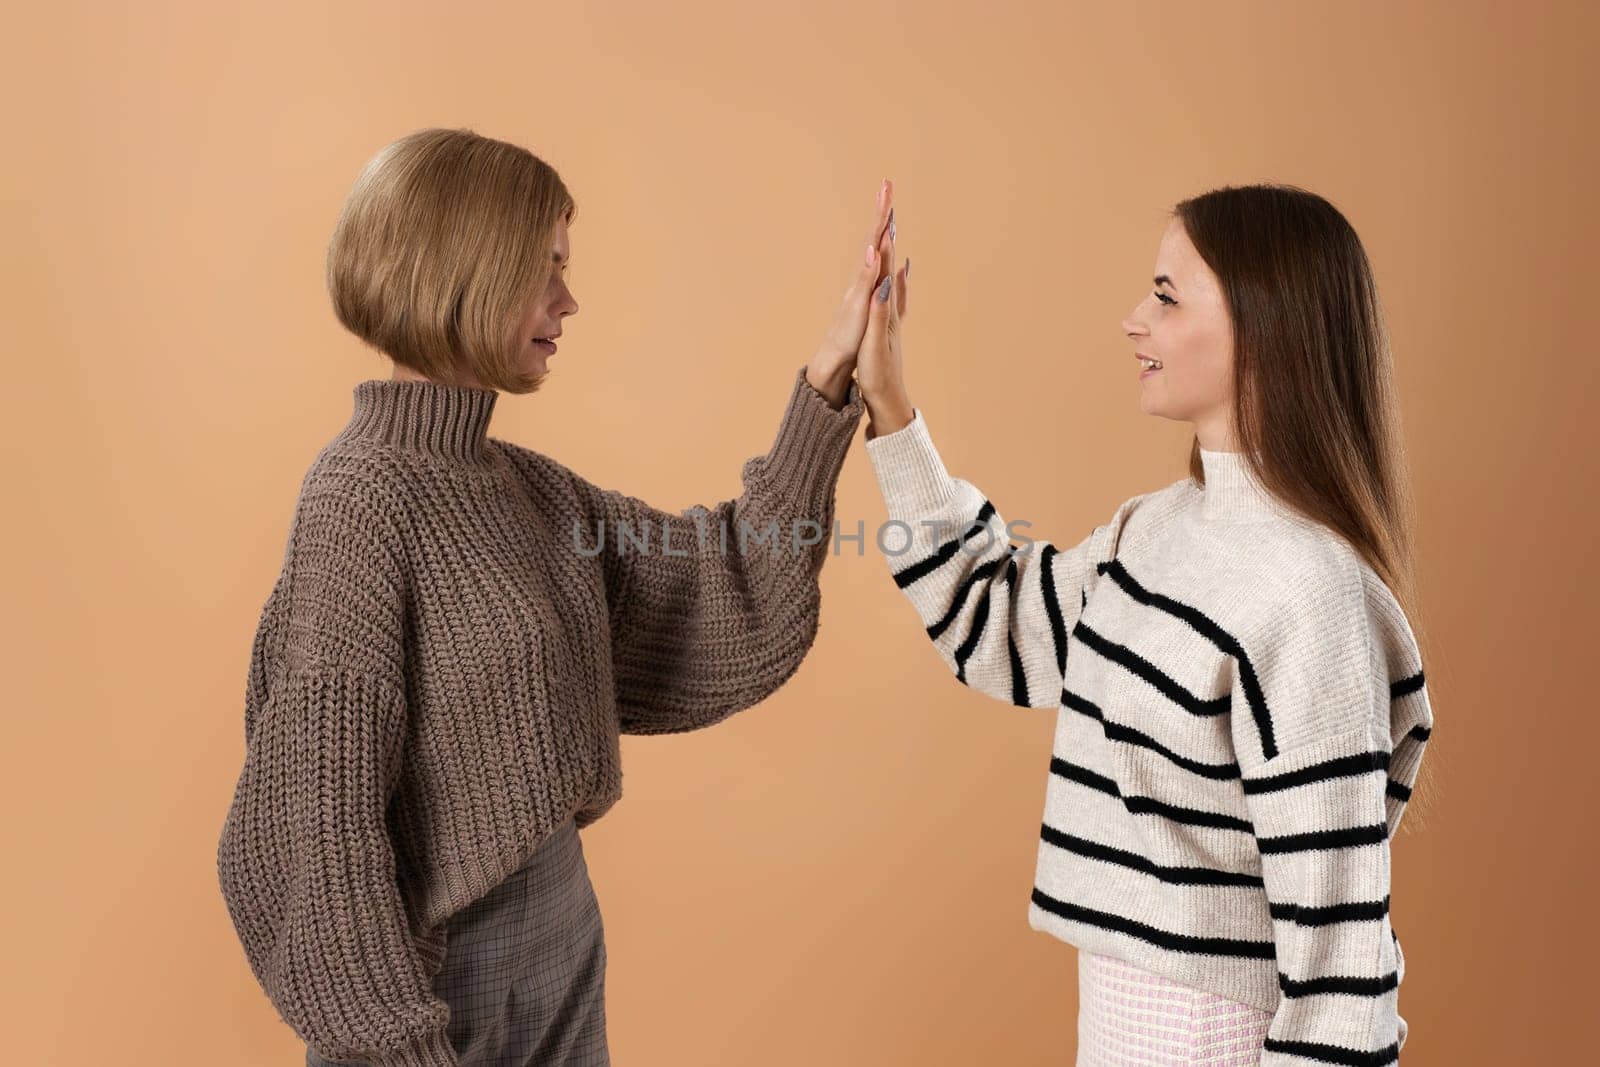 two young women friends giving high five hold hands on beige background